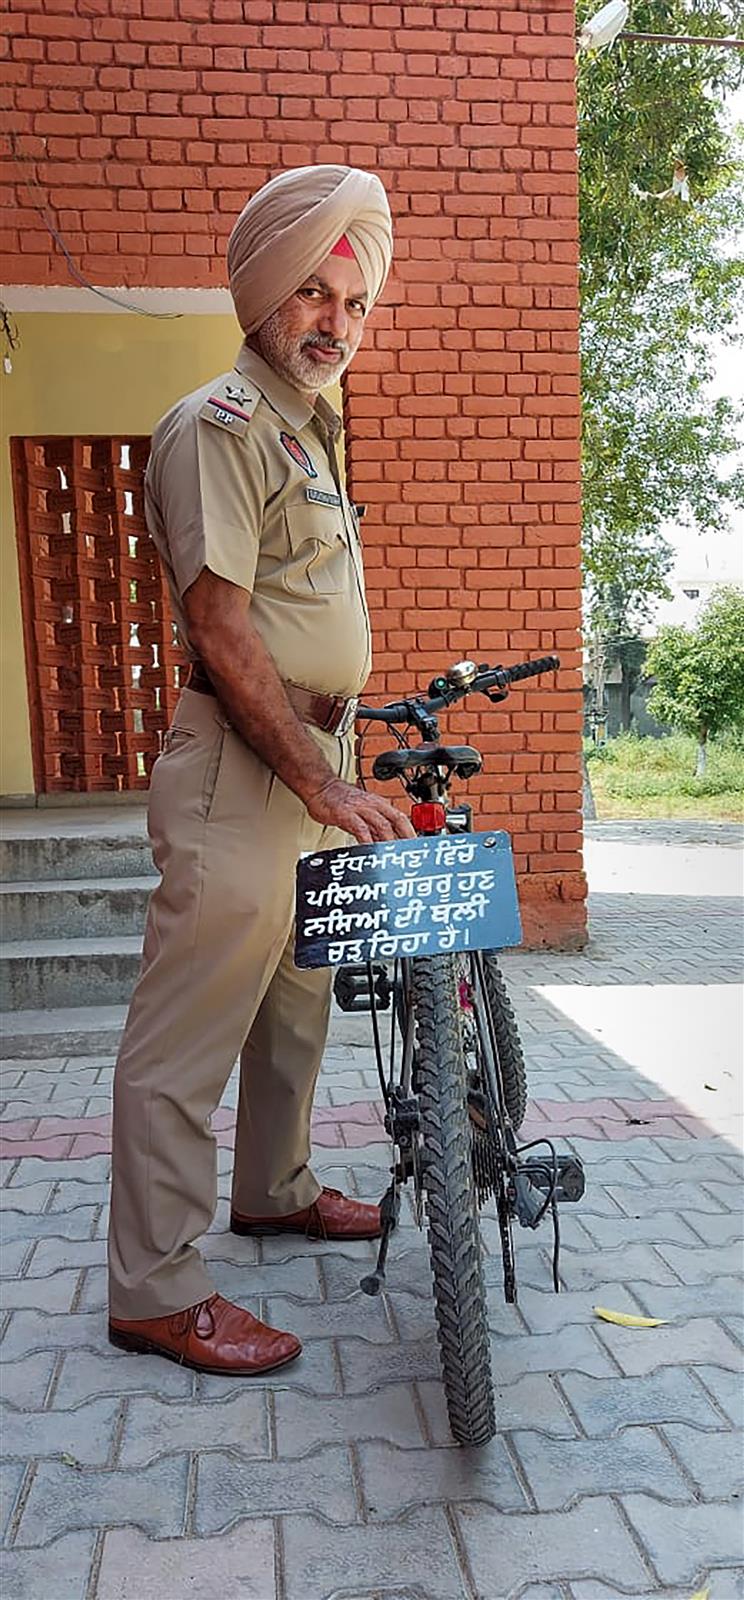 Meet Gurbachan Singh: Cop by the day, anti-drug crusader by the evening